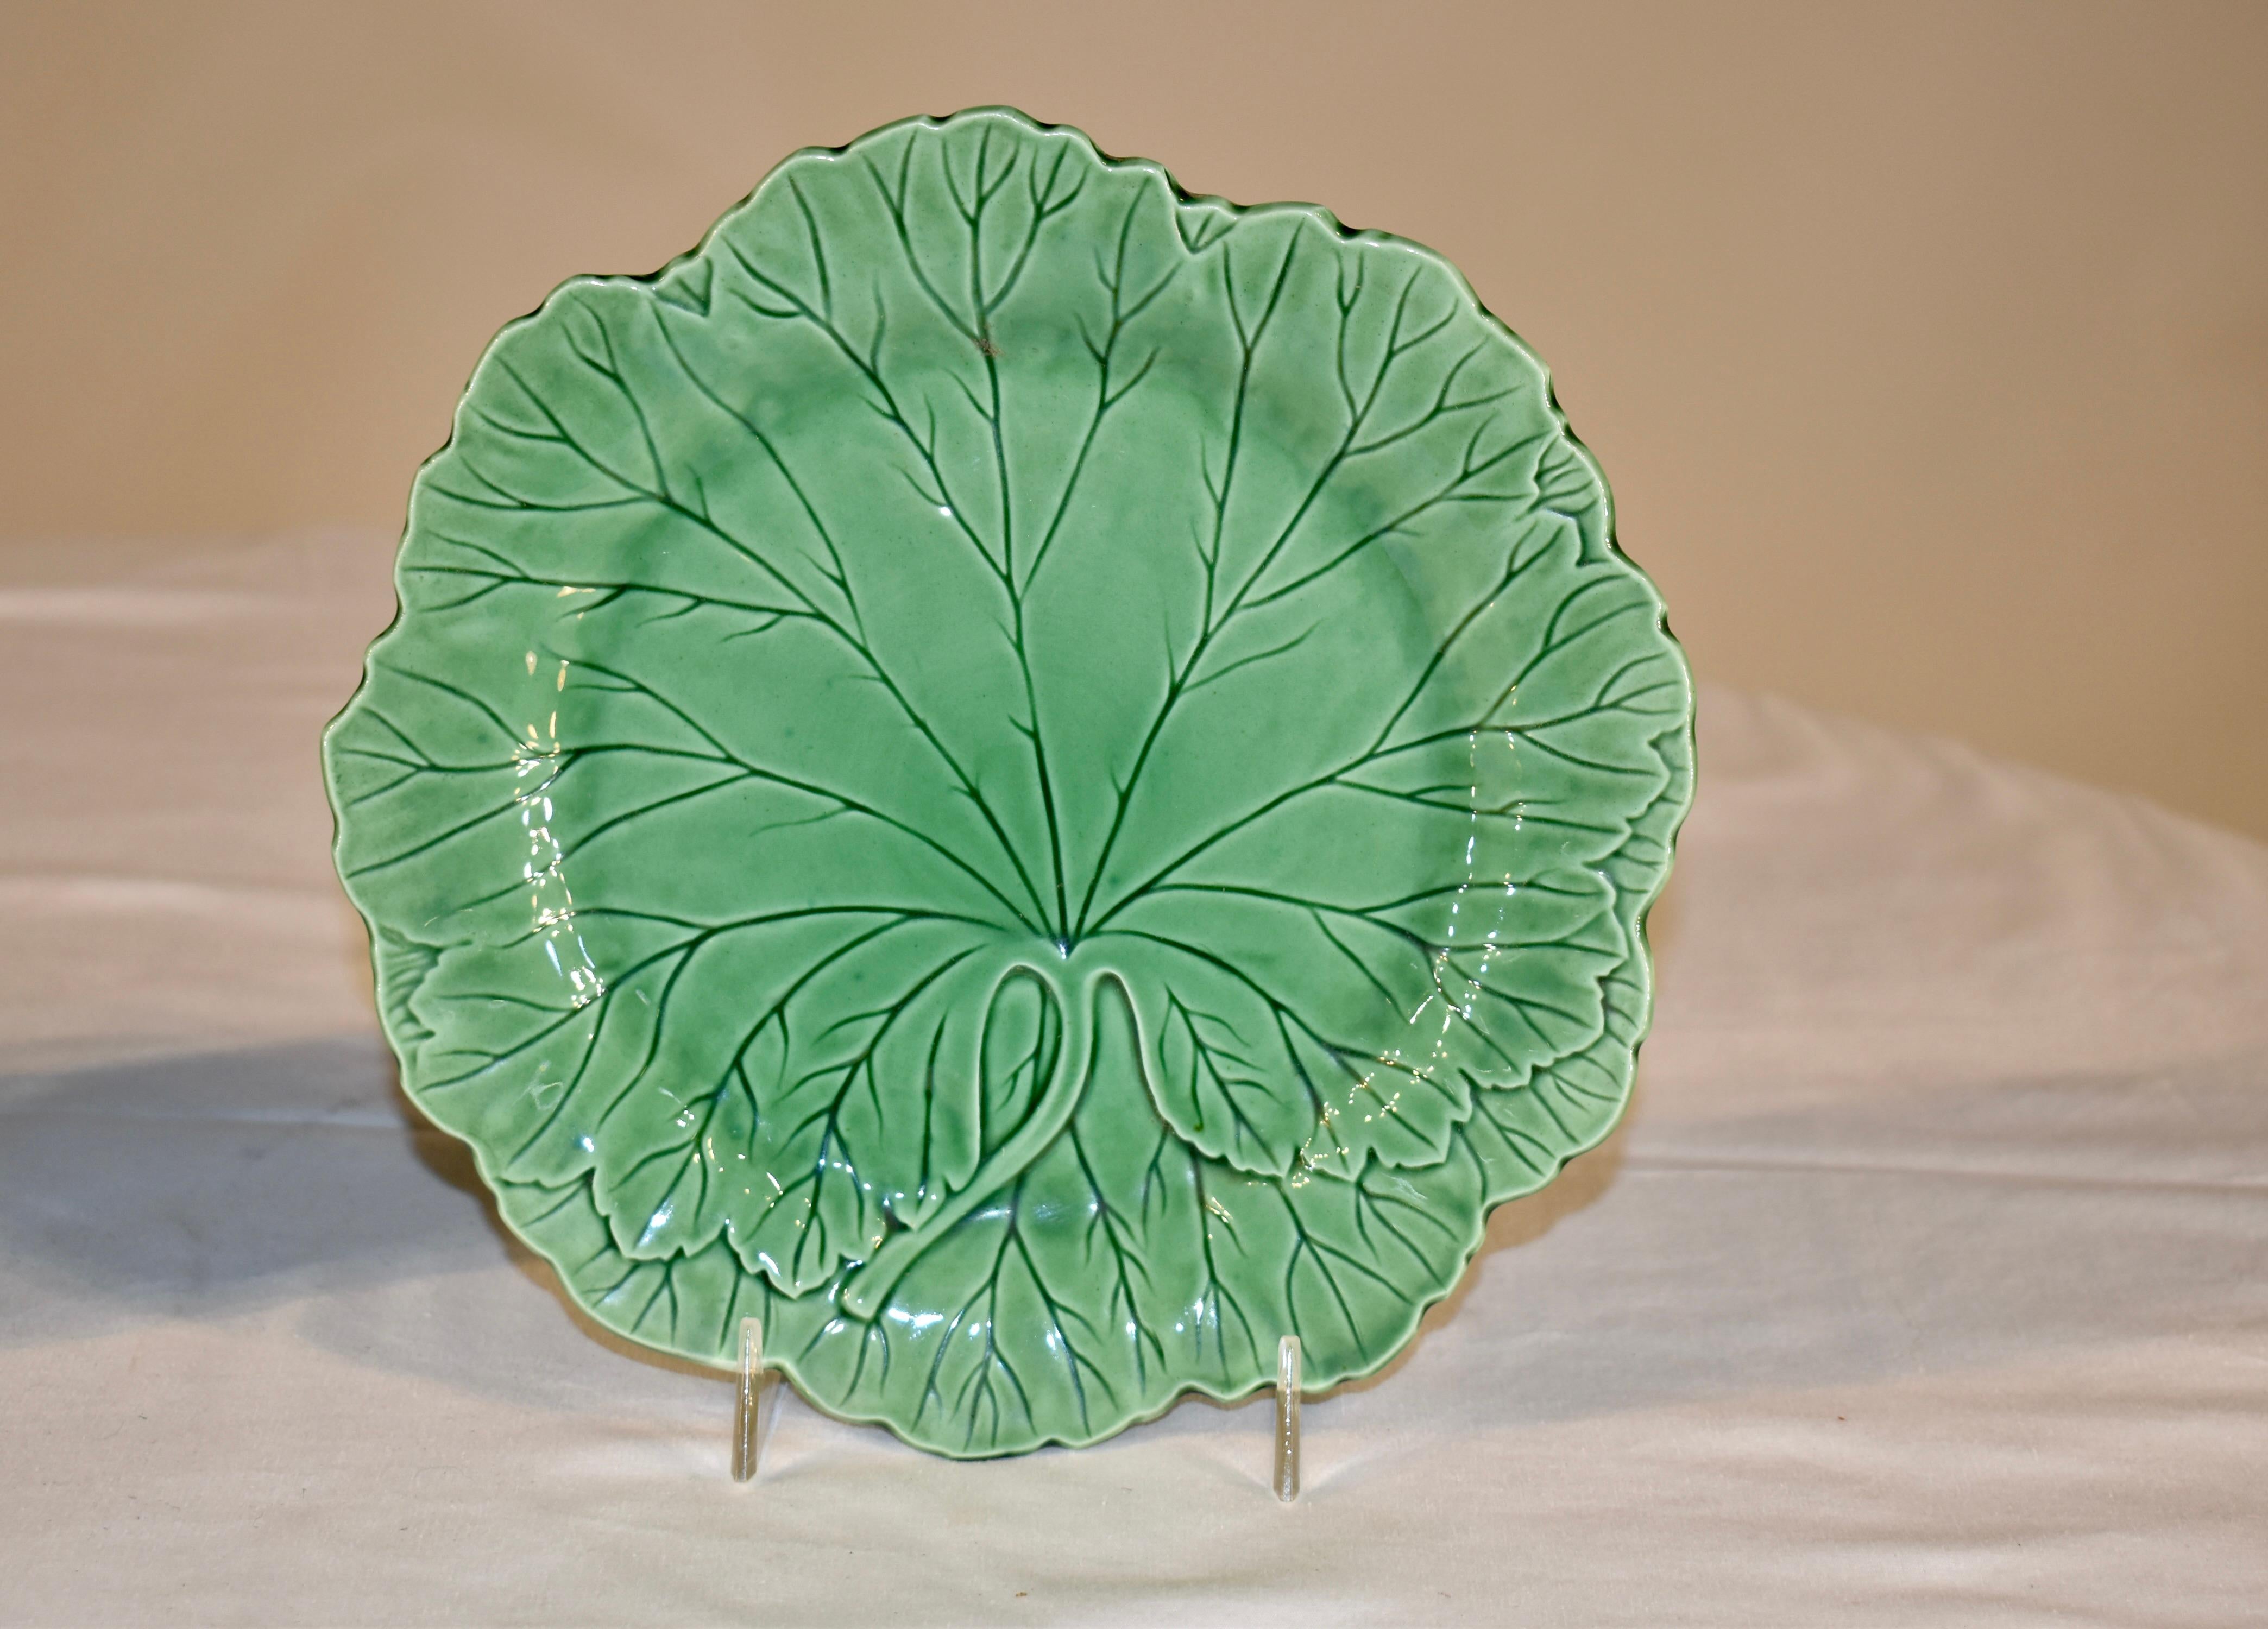 Pair of majolica glazed green leaf plates marked on the back with WEDGWOOD, made in England and the date mark for 1952. Lovely color. Plate stands not included.